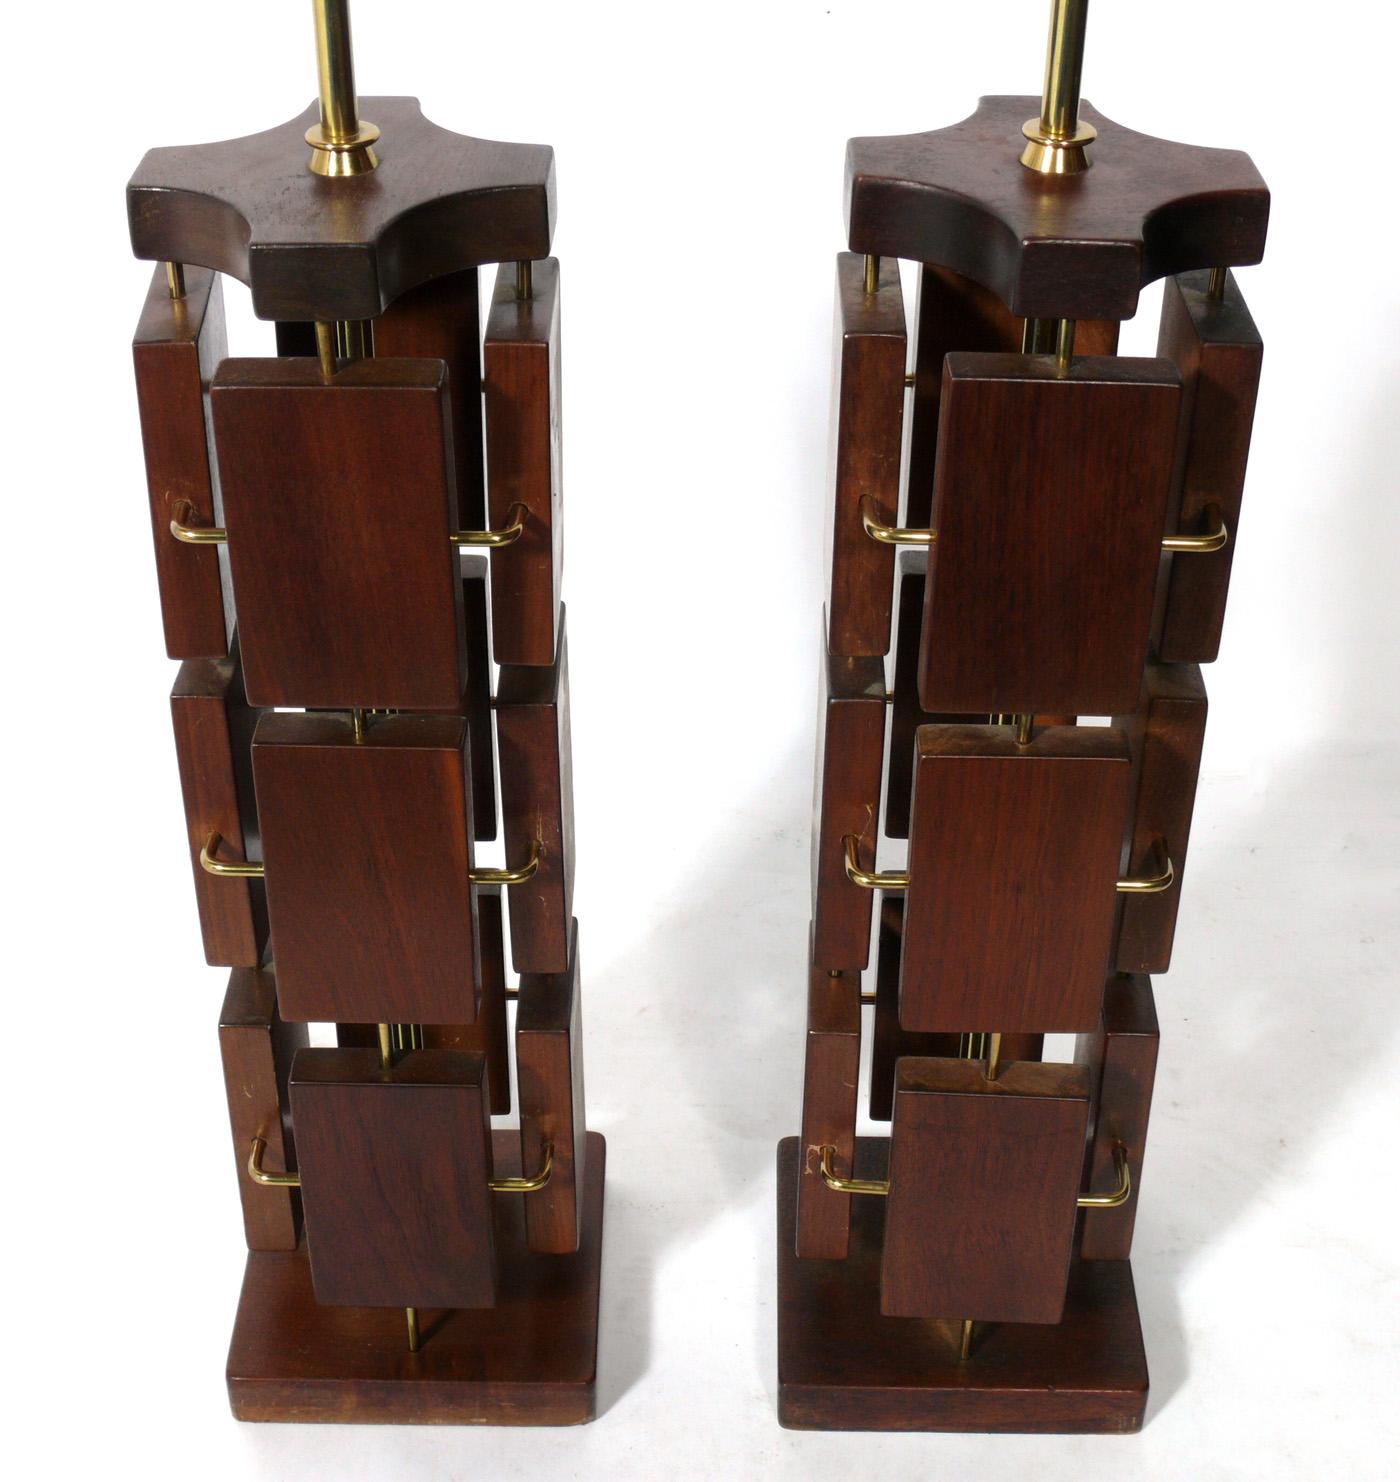 Pair of Sculptural Walnut and Brass Mid-Century Modern Lamps In Good Condition For Sale In Atlanta, GA